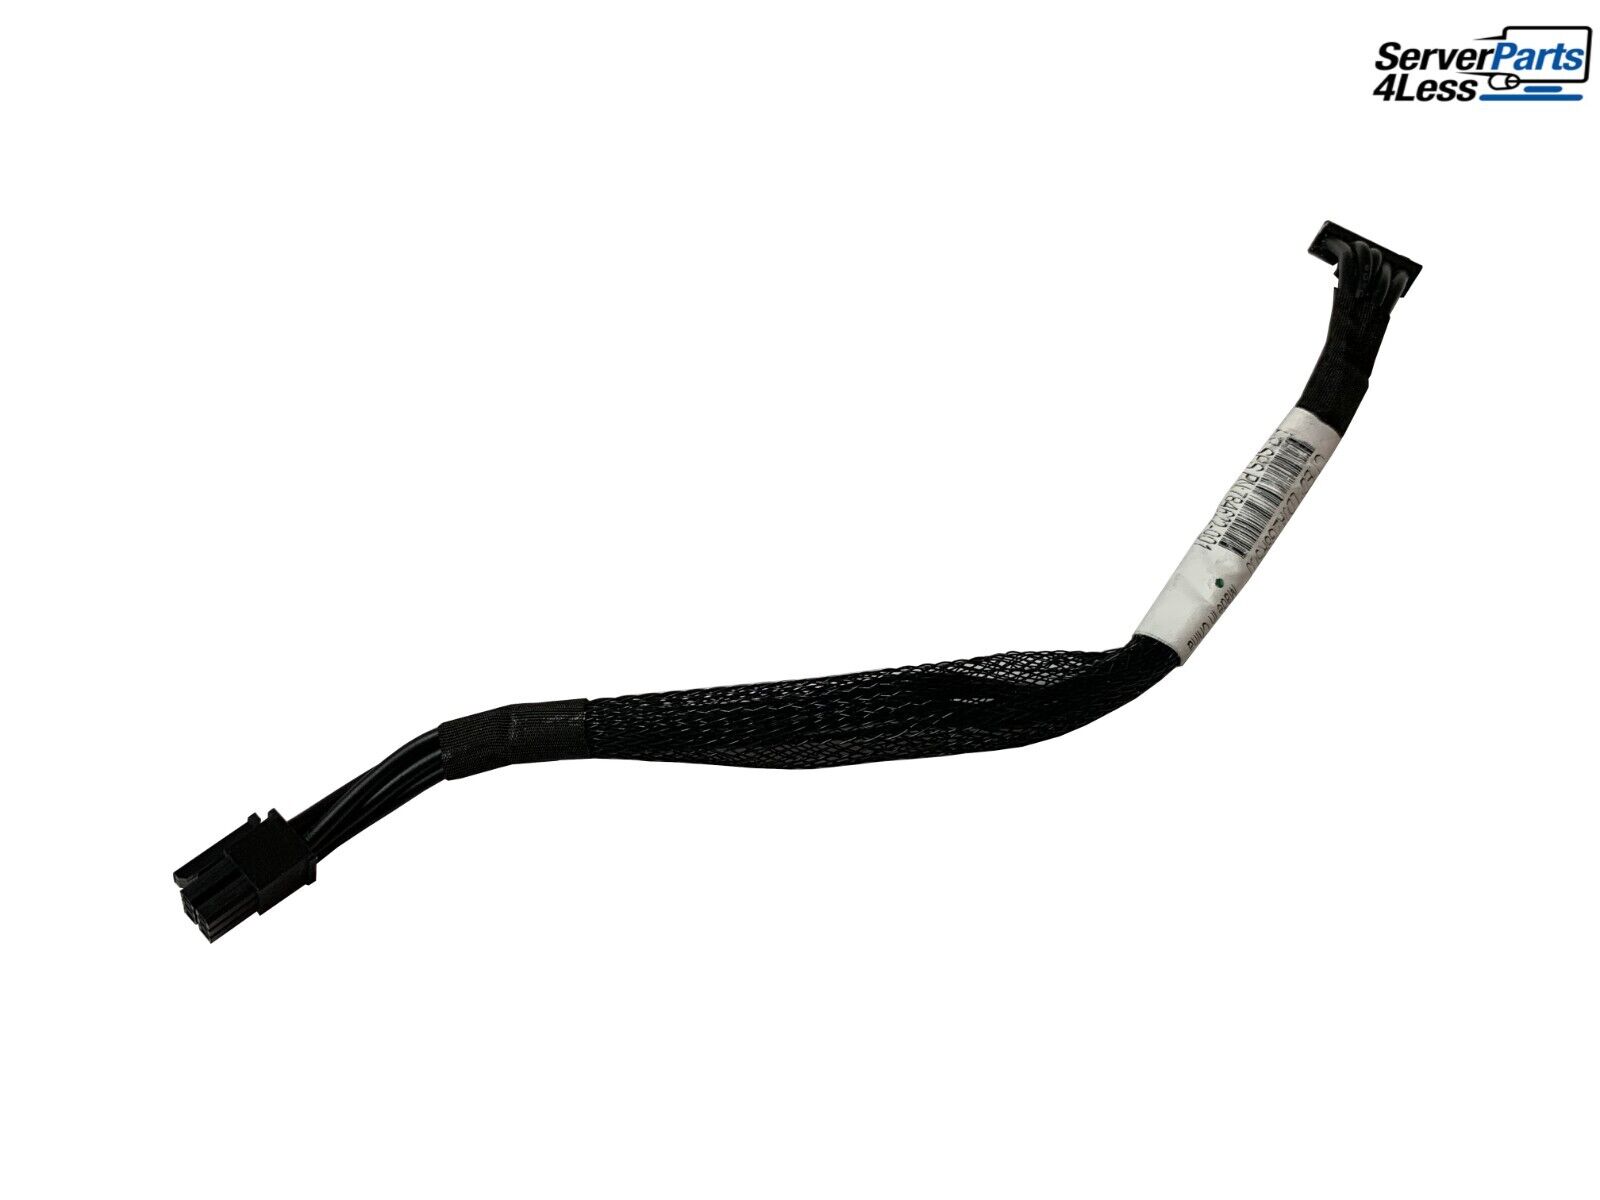 HPE 784622-001 DL380 Gen 9 Backplane Power Cable 747561-001